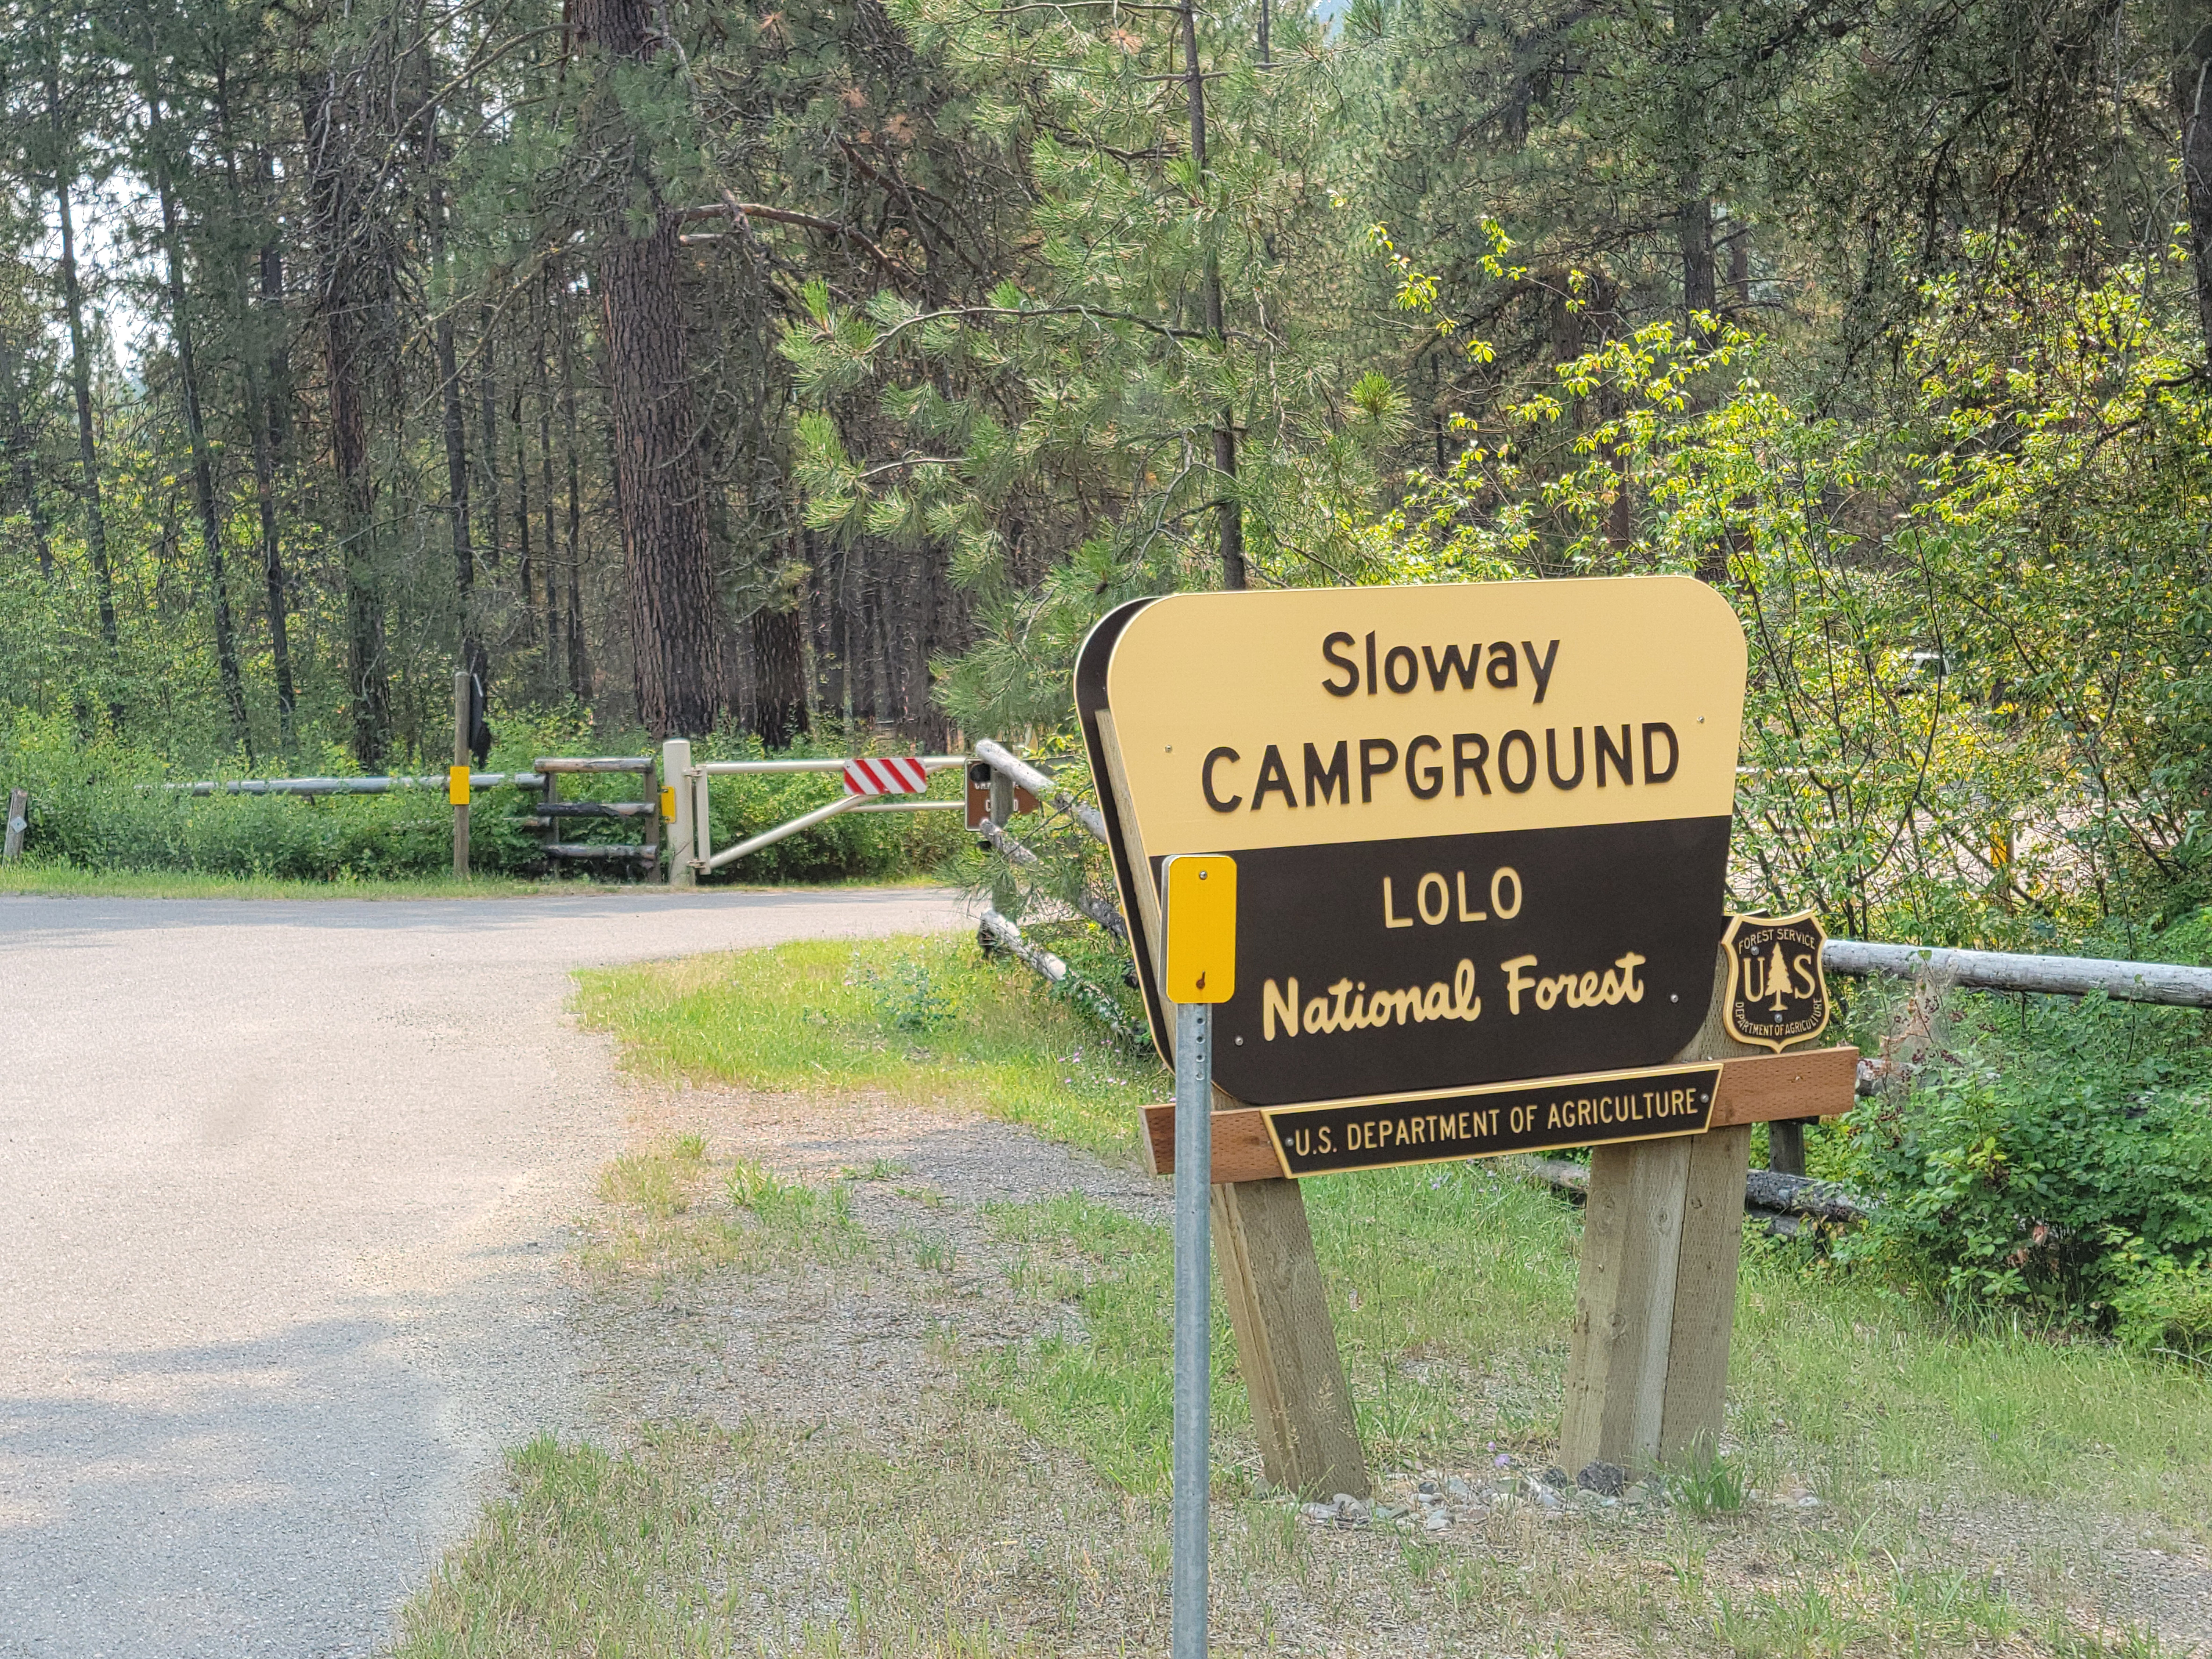 Camper submitted image from Sloway Campground - 4